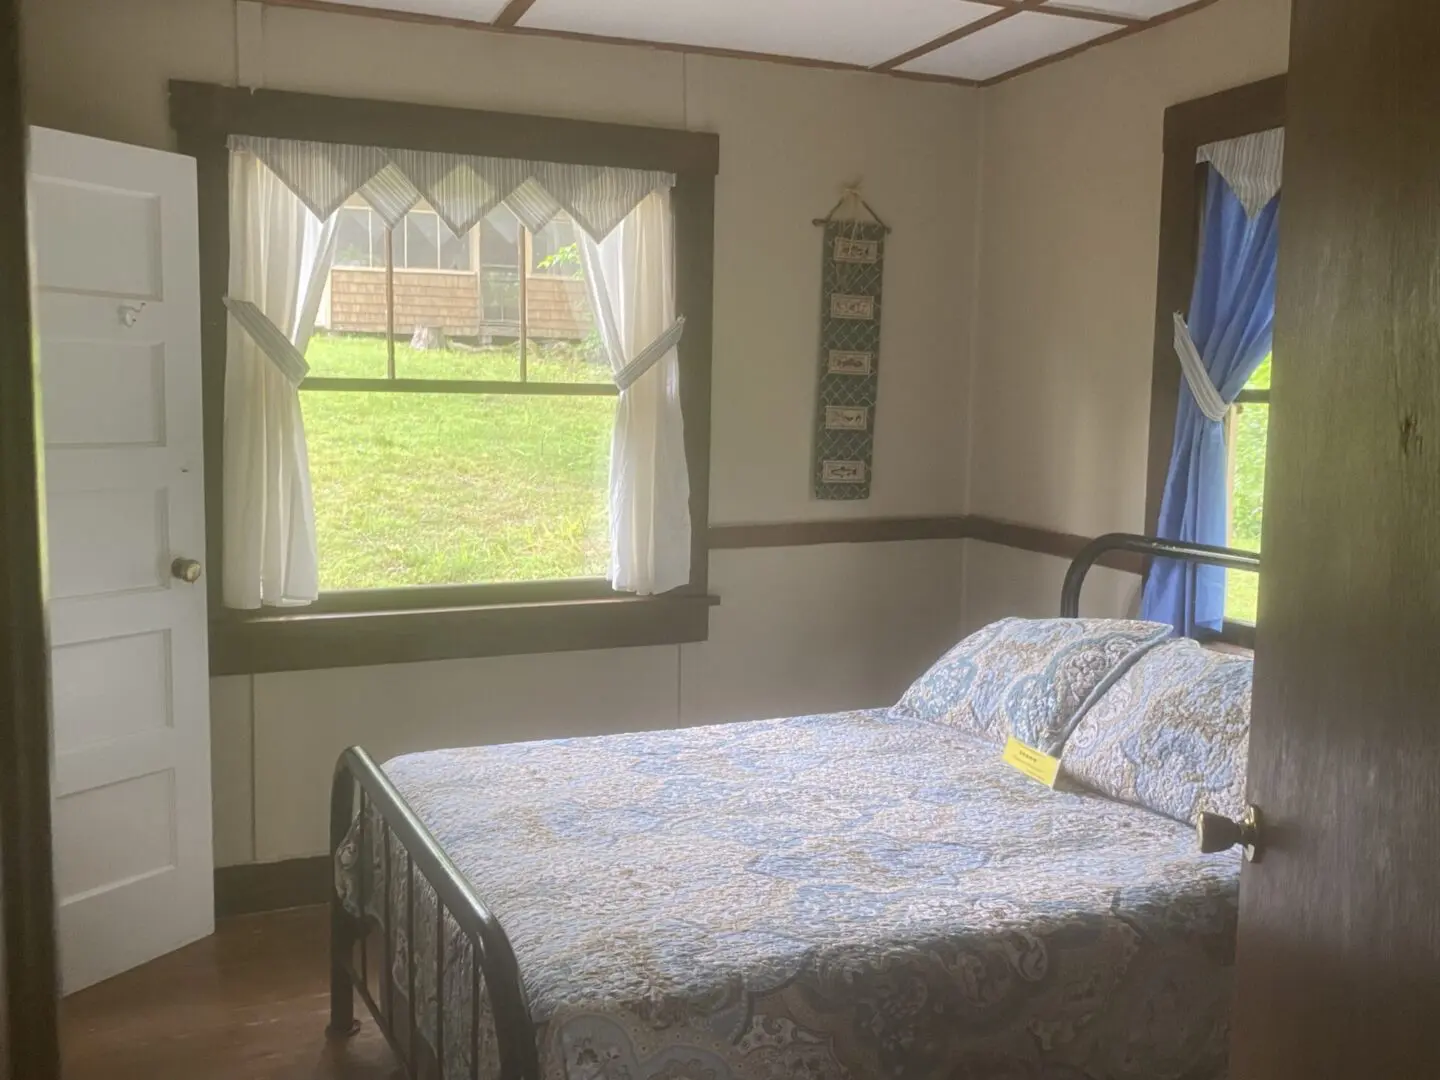 A bedroom with a bed and two windows.